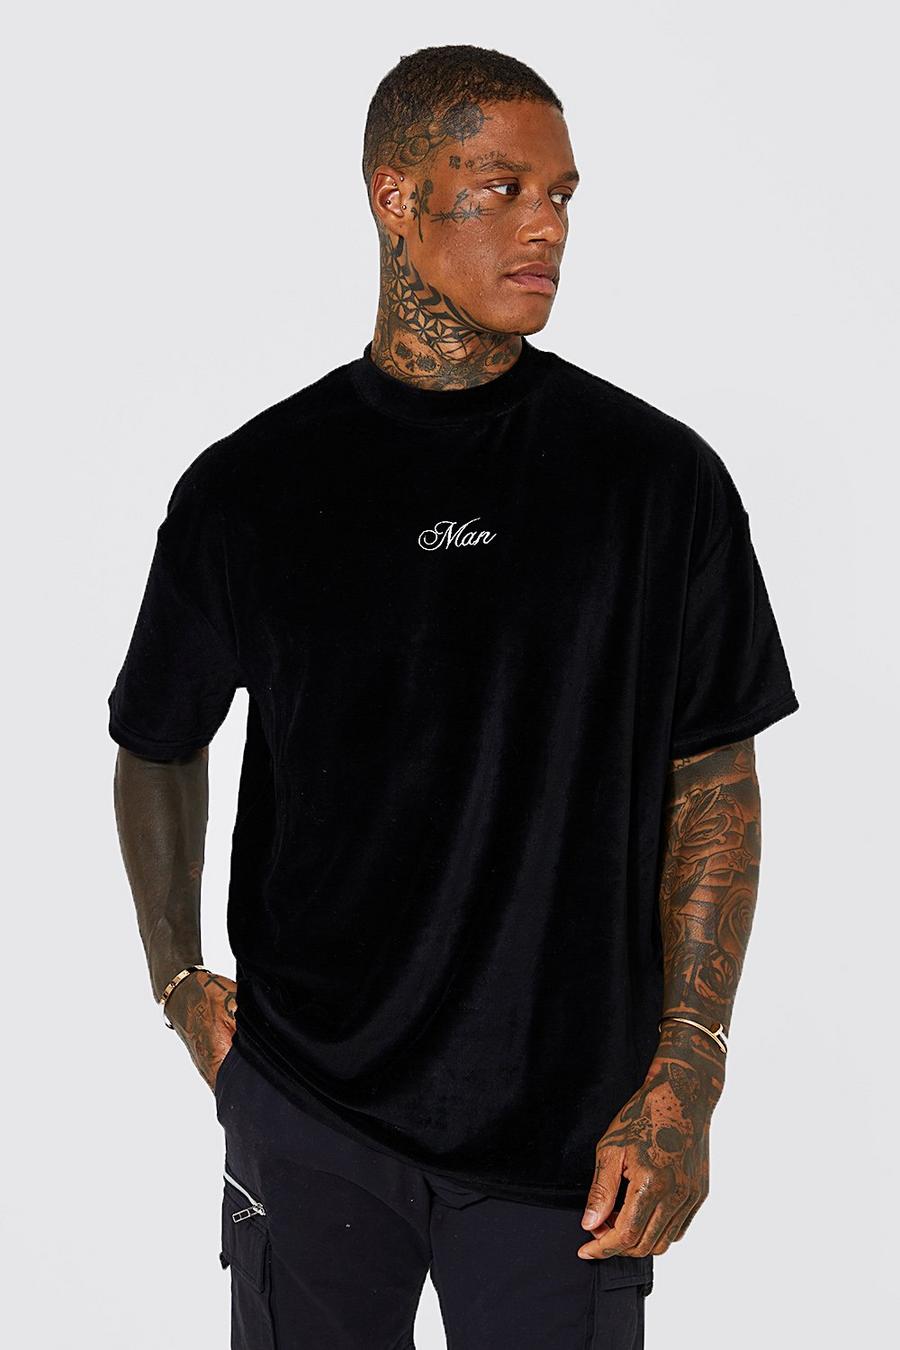 Velour Man Embroidered T-shirt | boohoo